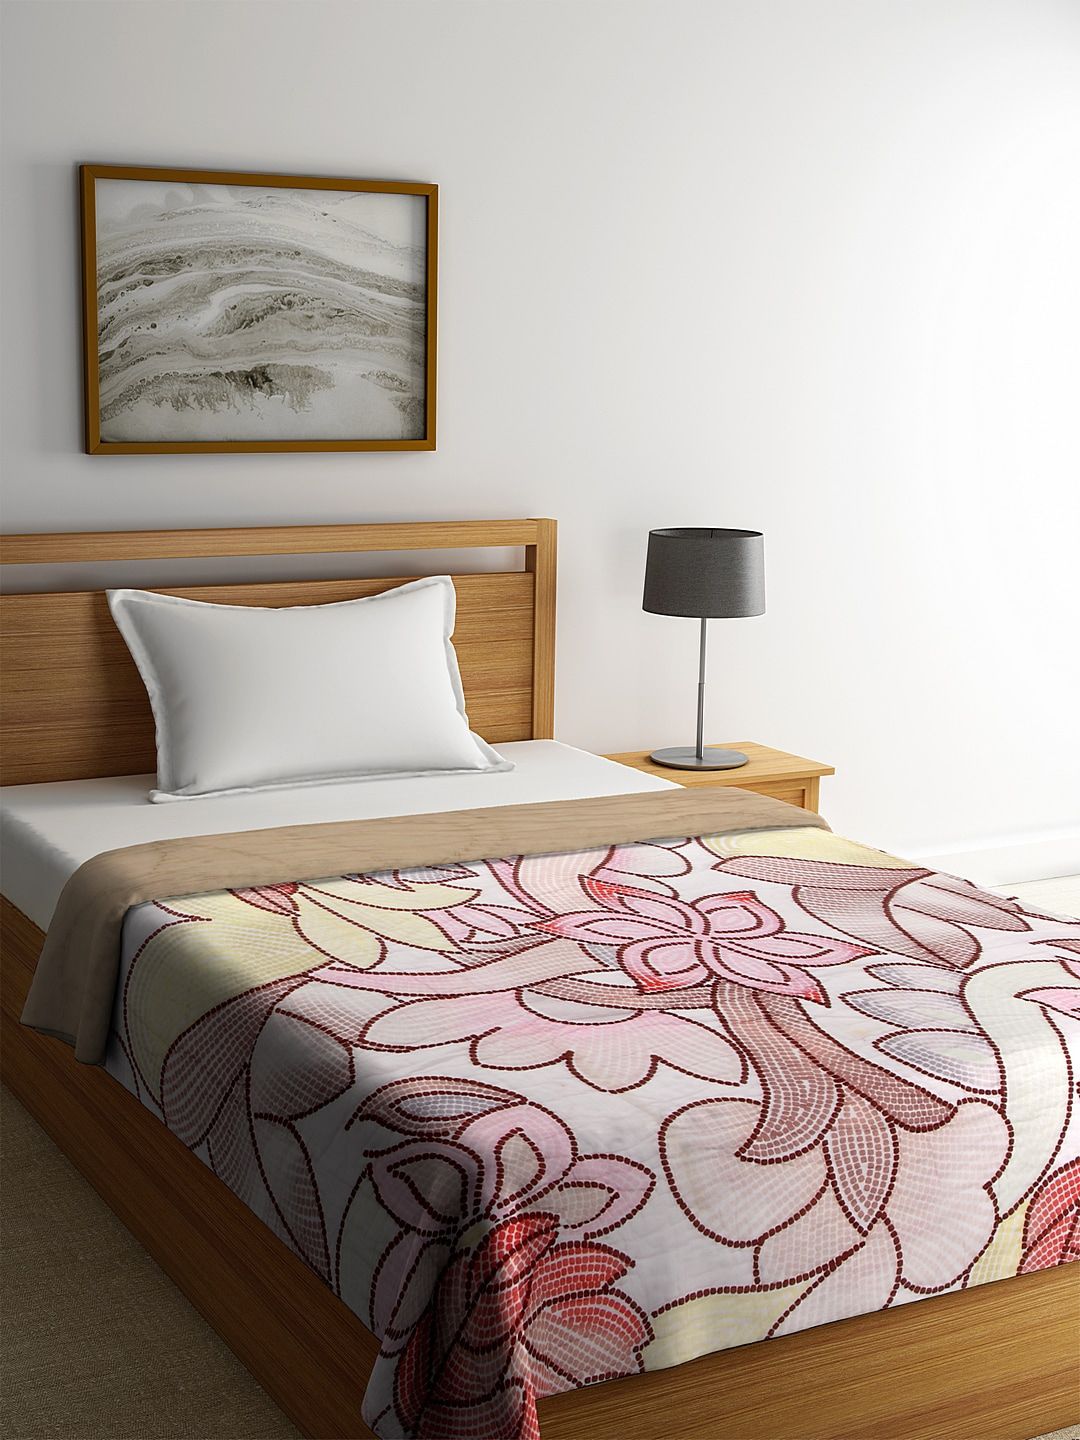 REME White & Maroon Digital Floral Printed Organic-Cotton Heavy Winter 150 GSM Sustainable Single Bed Quilt Price in India